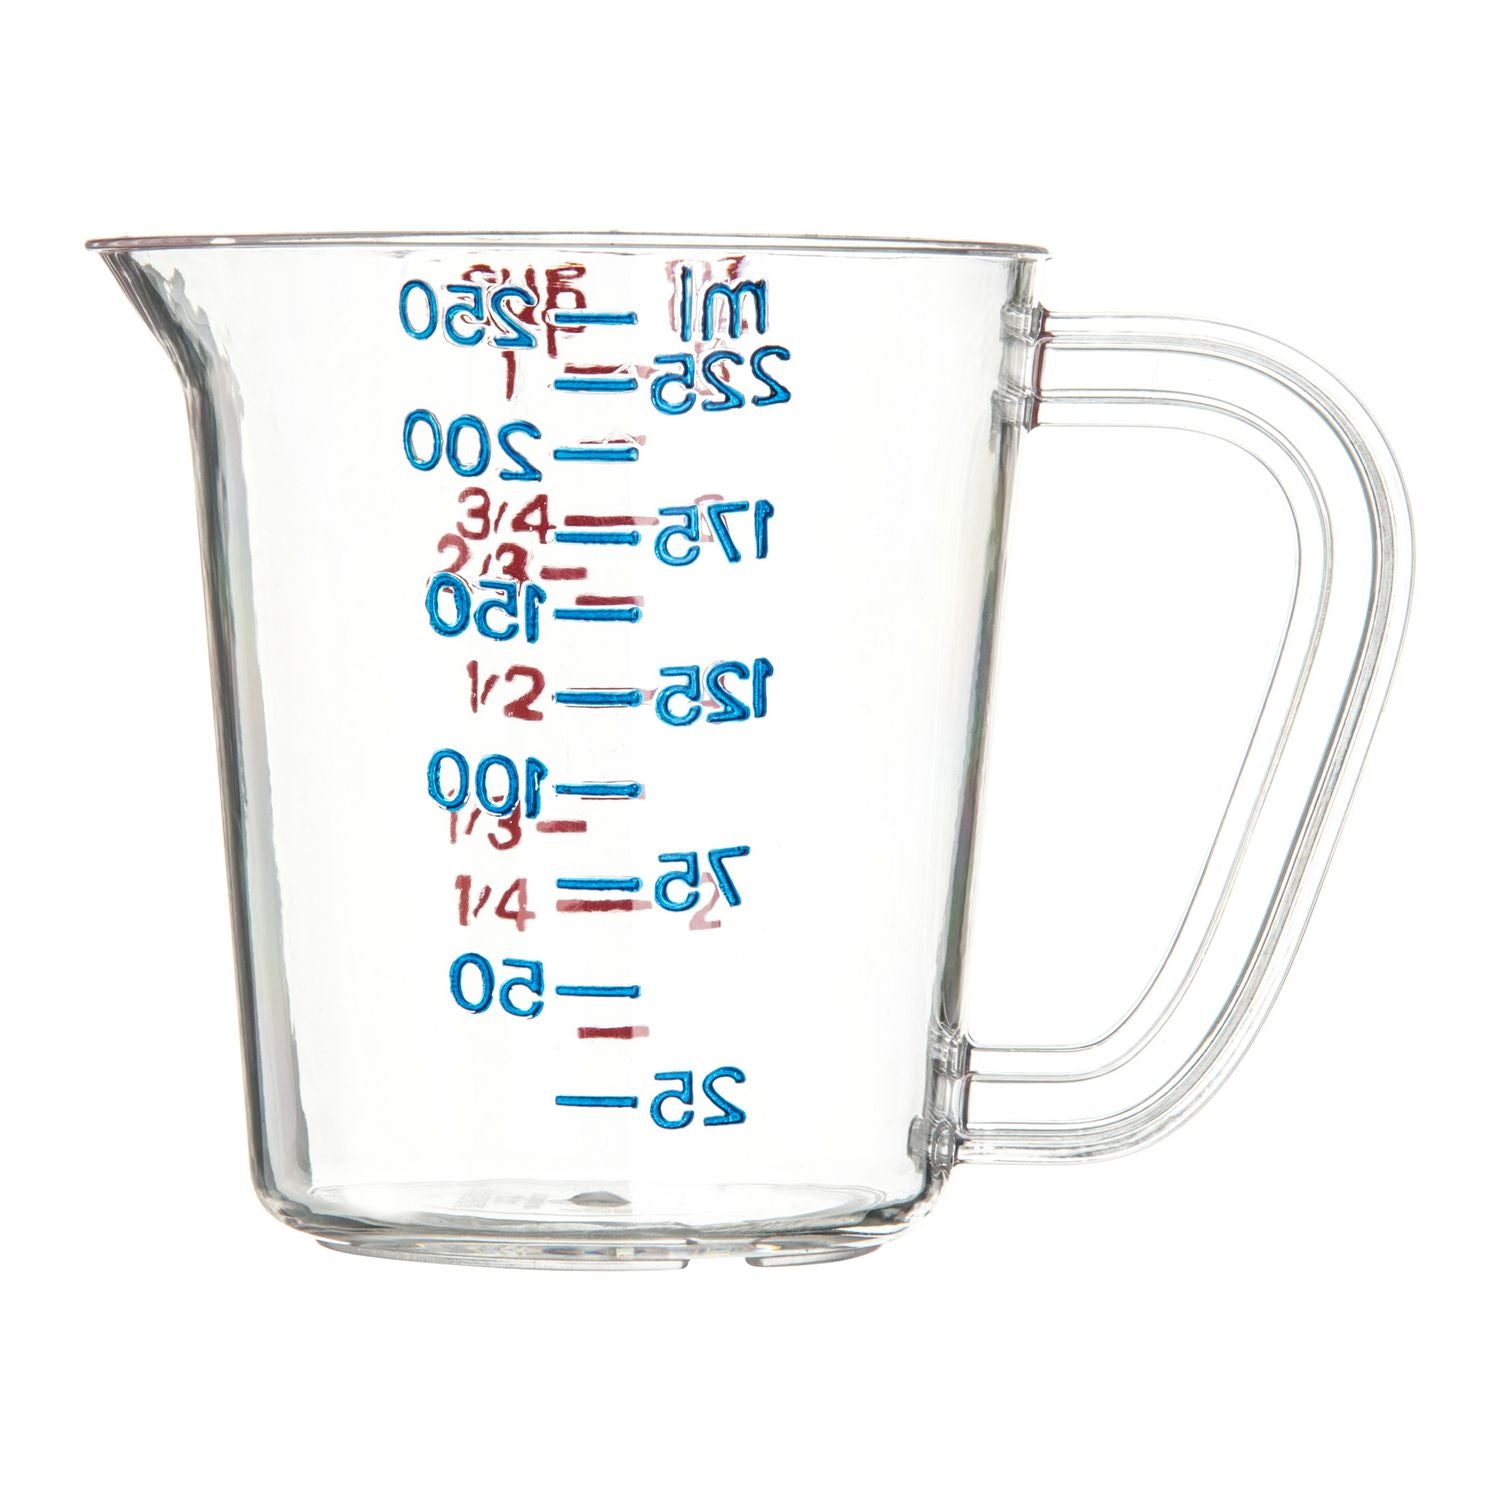 commercial-measuring-cup-1-cup-clear_cfs4314107 - 2